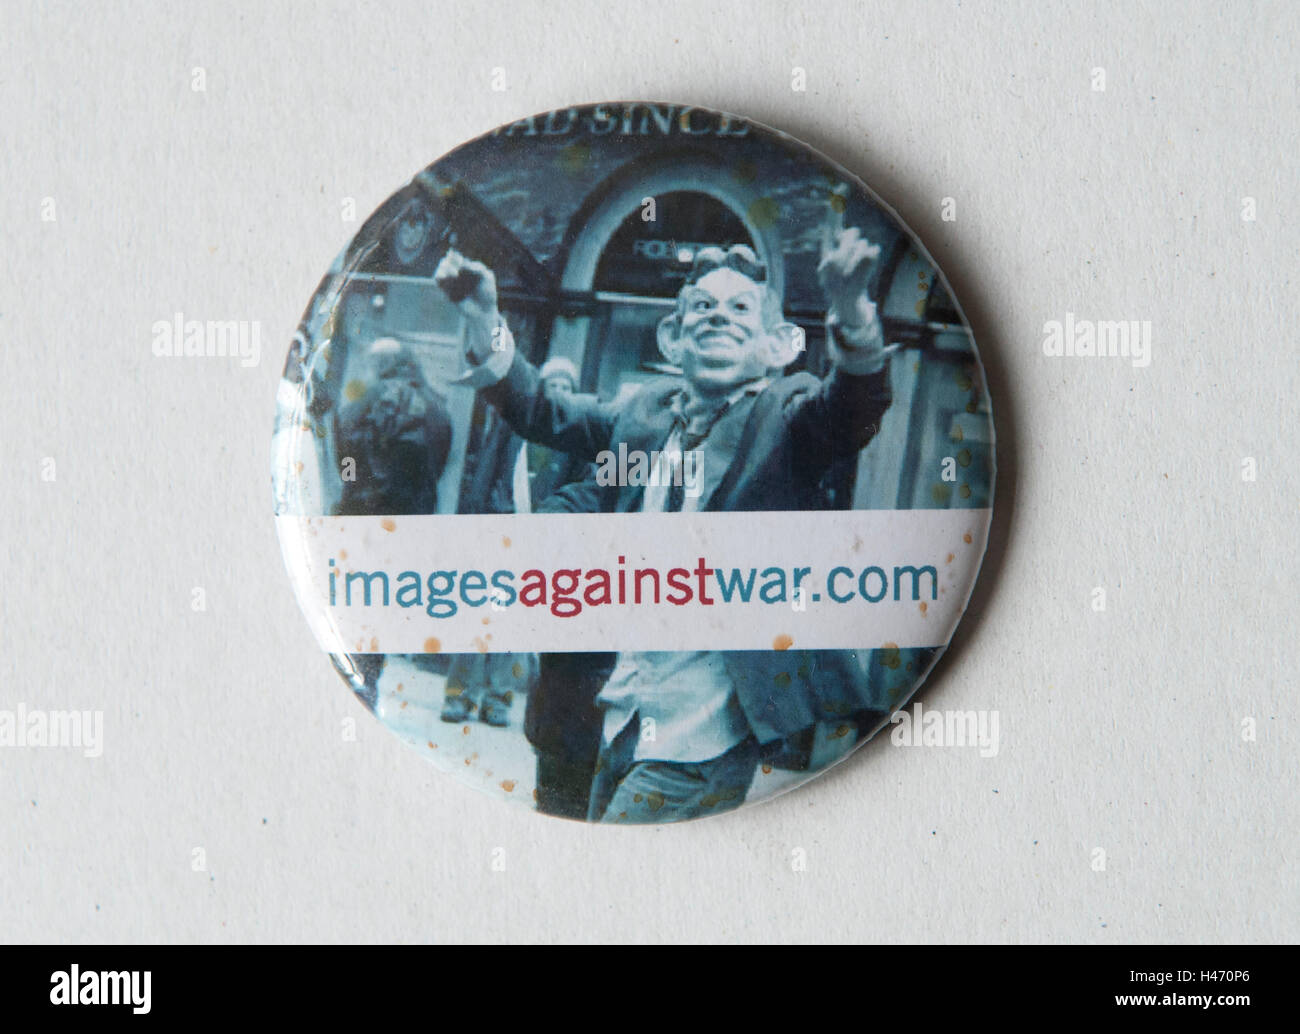 Tony Blair PM, a caricature  pin button badge Images Against War HOMER SYKES Stock Photo